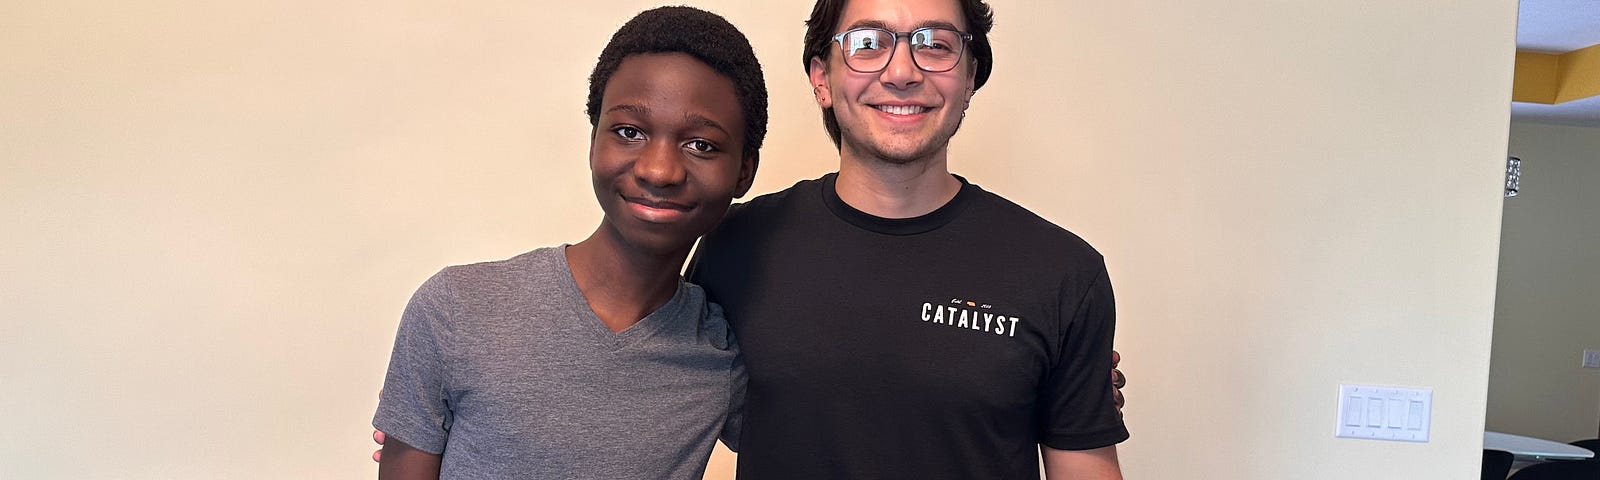 Brandon (right) and Jeffrey, his mentee, smile for a photo